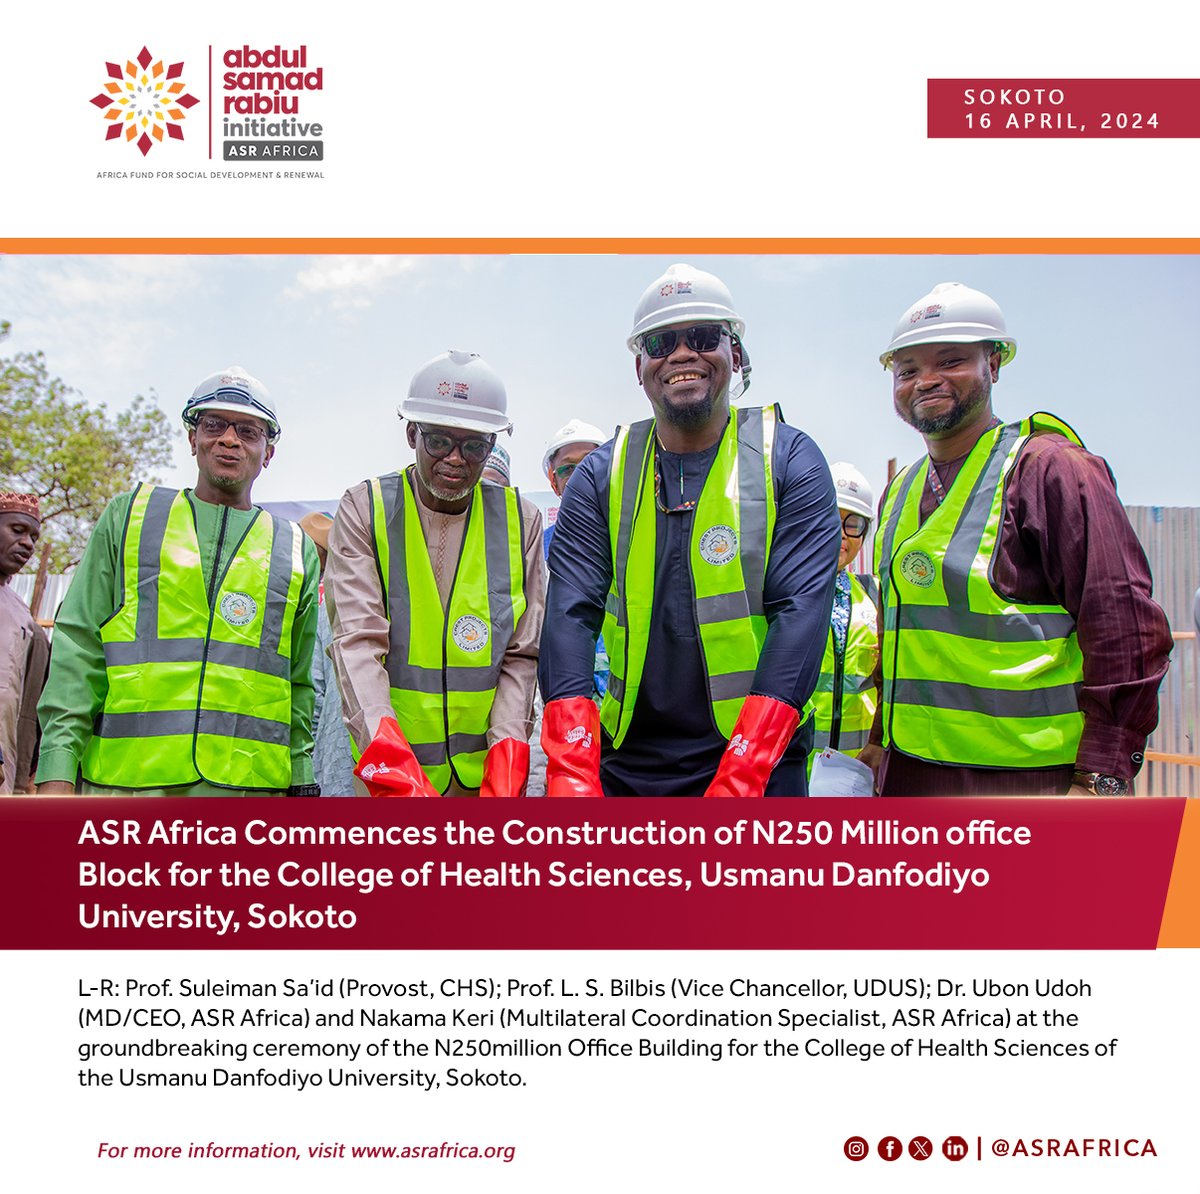 Pioneering Progress in Education, ASR Africa reinforces its commitment to supporting quality education within Nigeria and across Africa’s tertiary education system with the groundbreaking of the N250 million Abdul Samad Rabiu College of Health Sciences Office Block at Usmanu